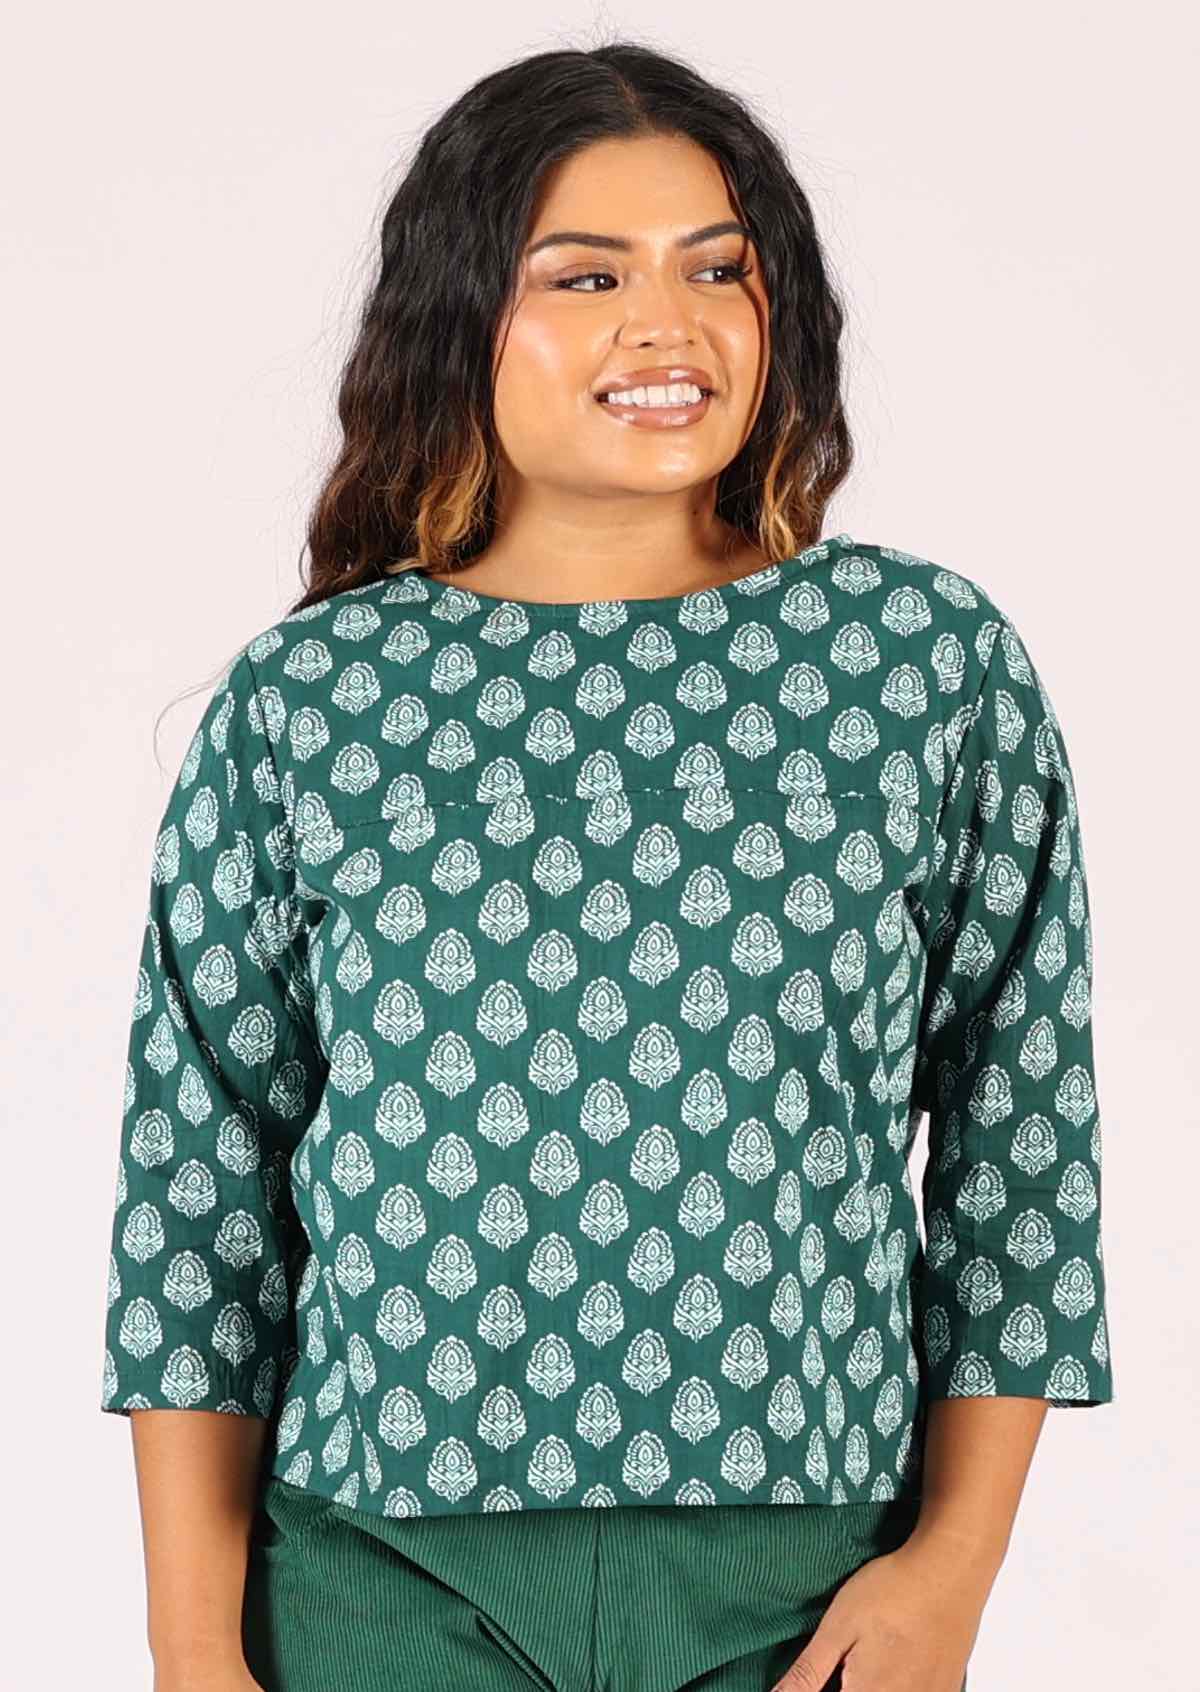 Relaxed fit cotton top in green base pendant print, great for office or play